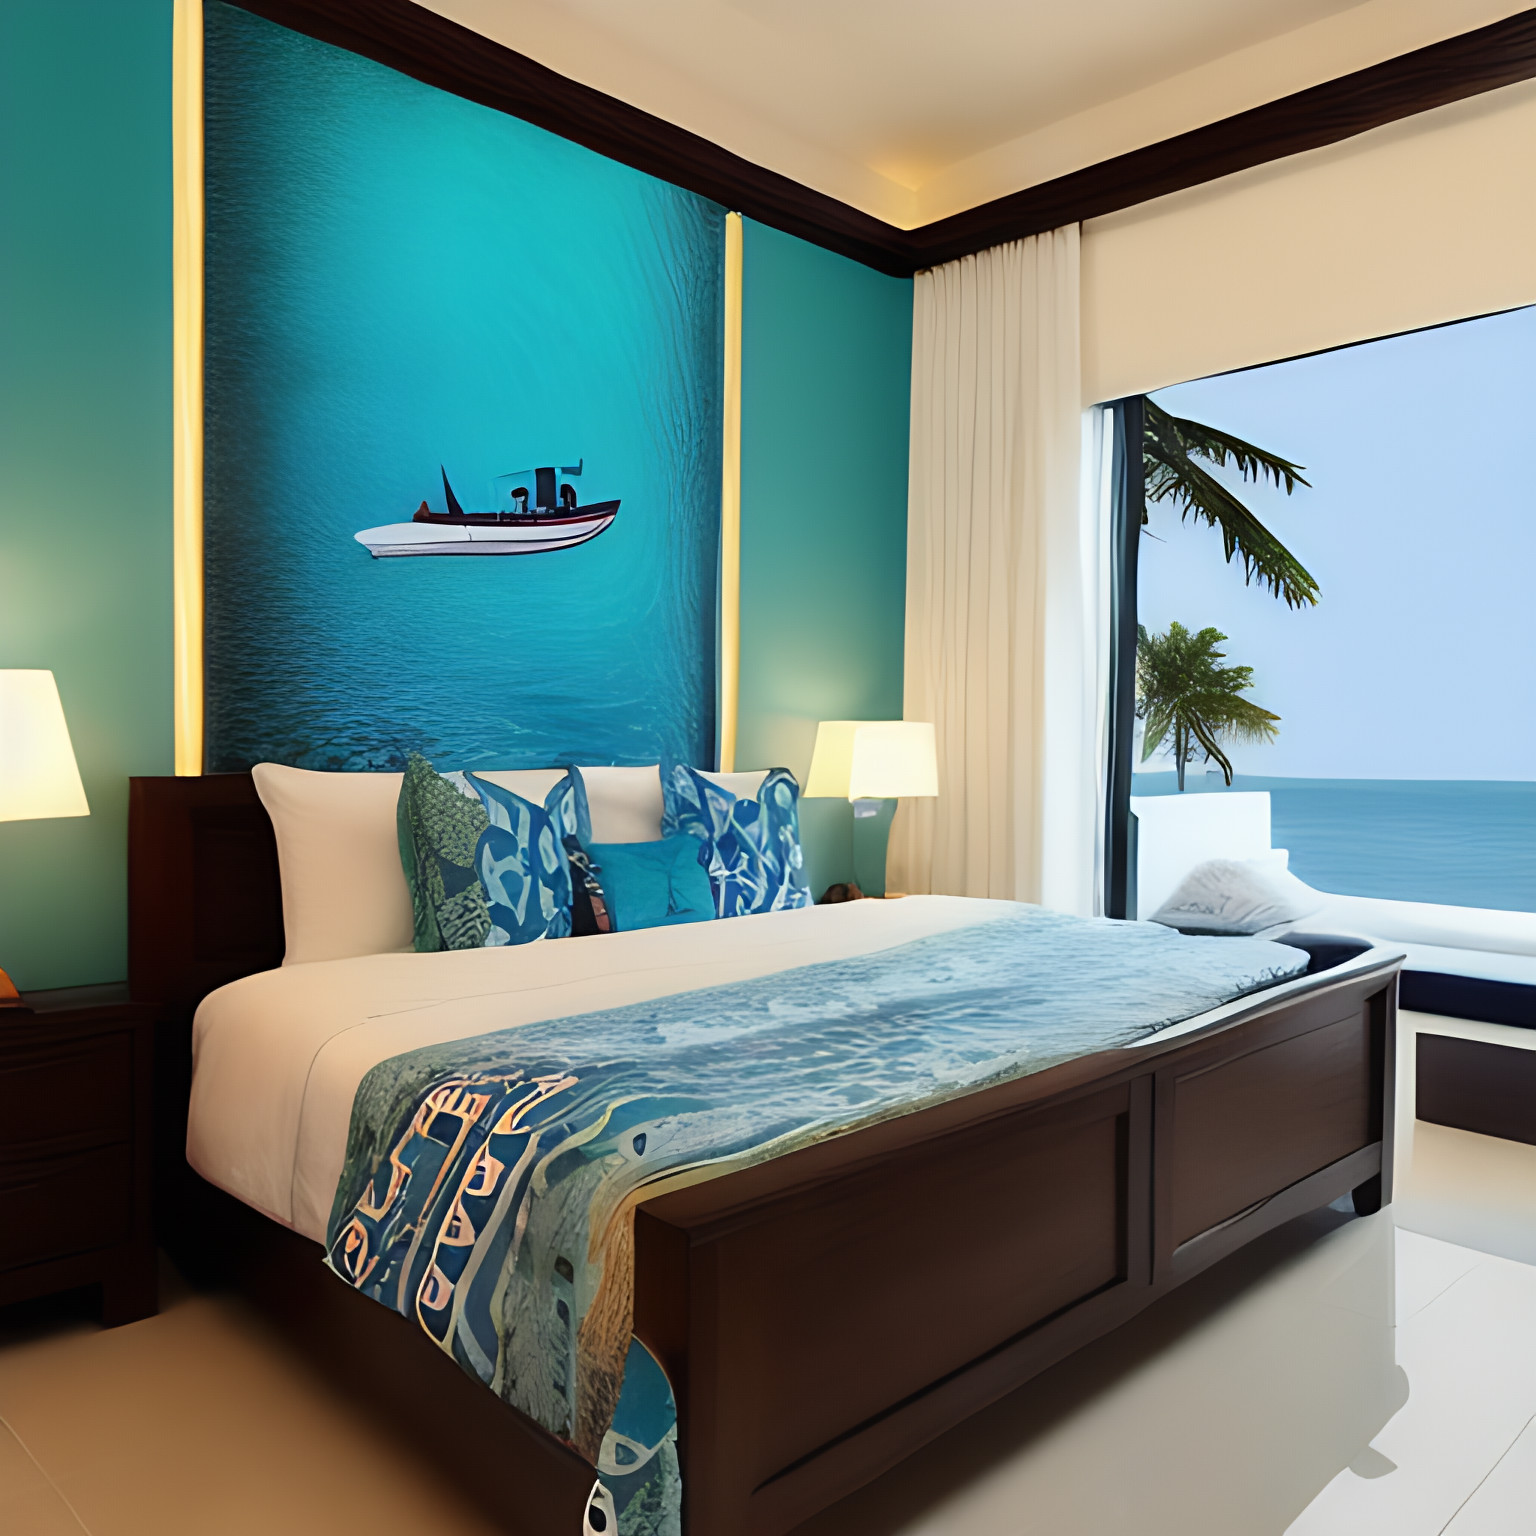 Lighting ambient of coastal-themed bedroom design in India